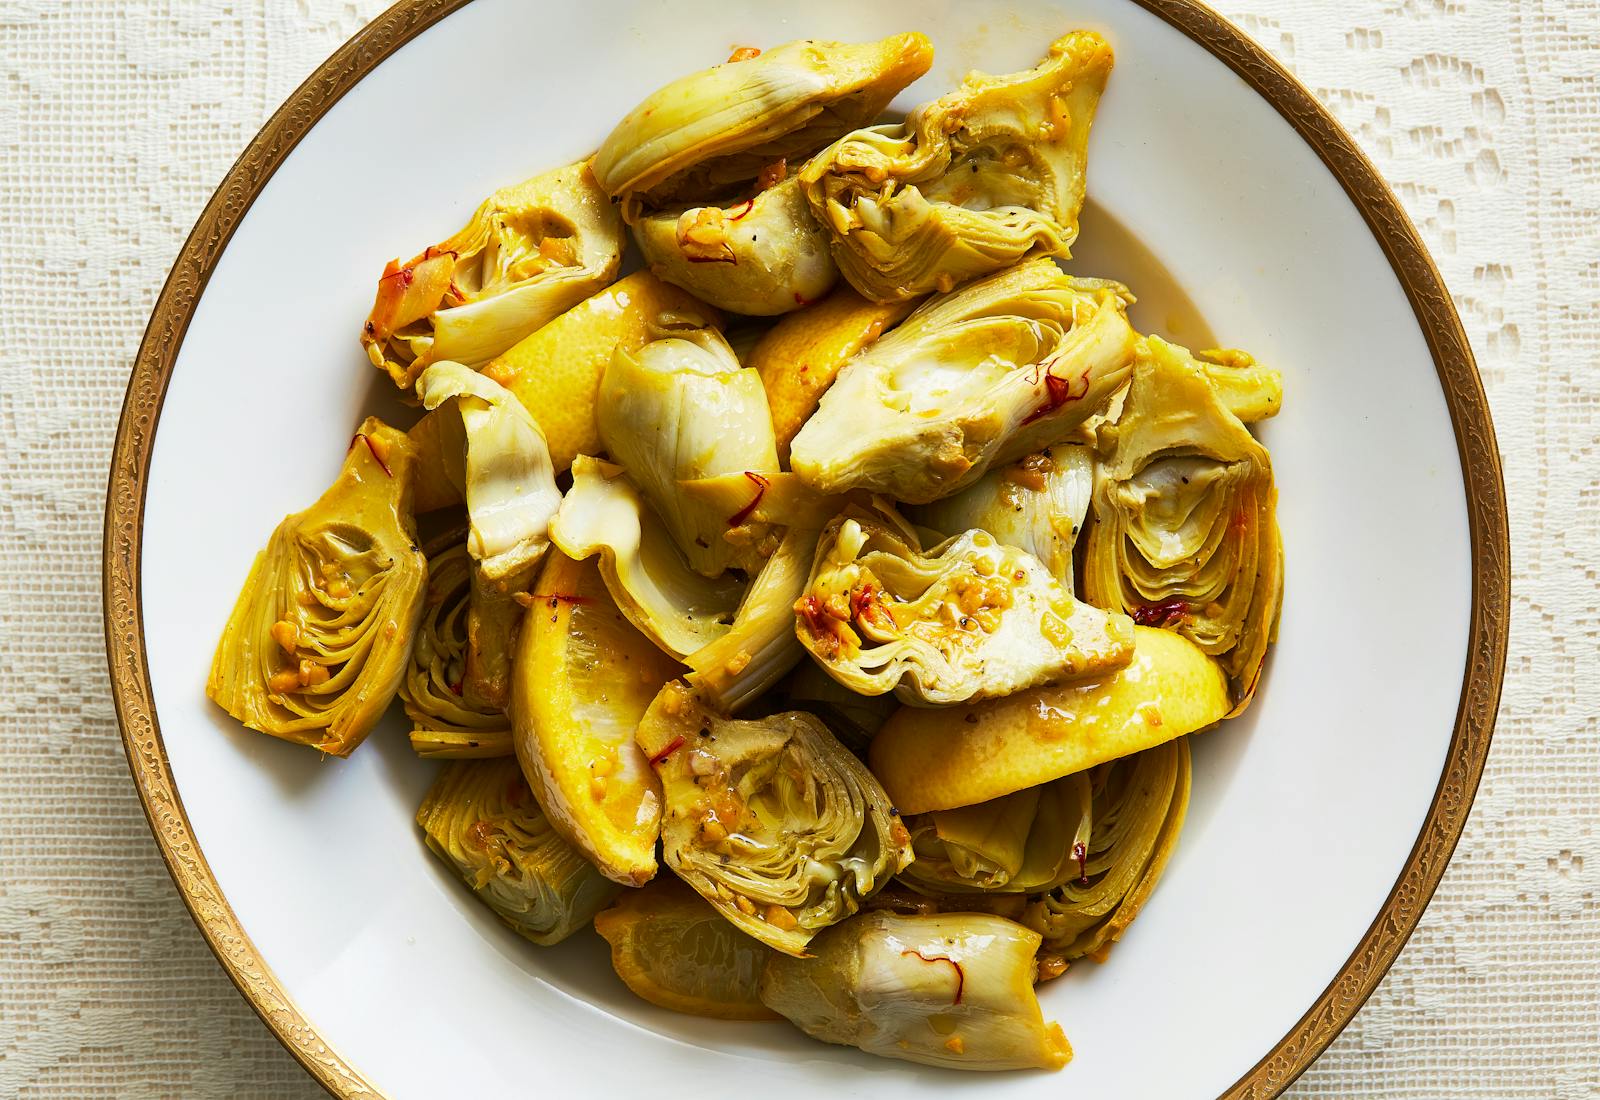 Sliced artichoke hearts and lemon slices in white bowl with golden rim.